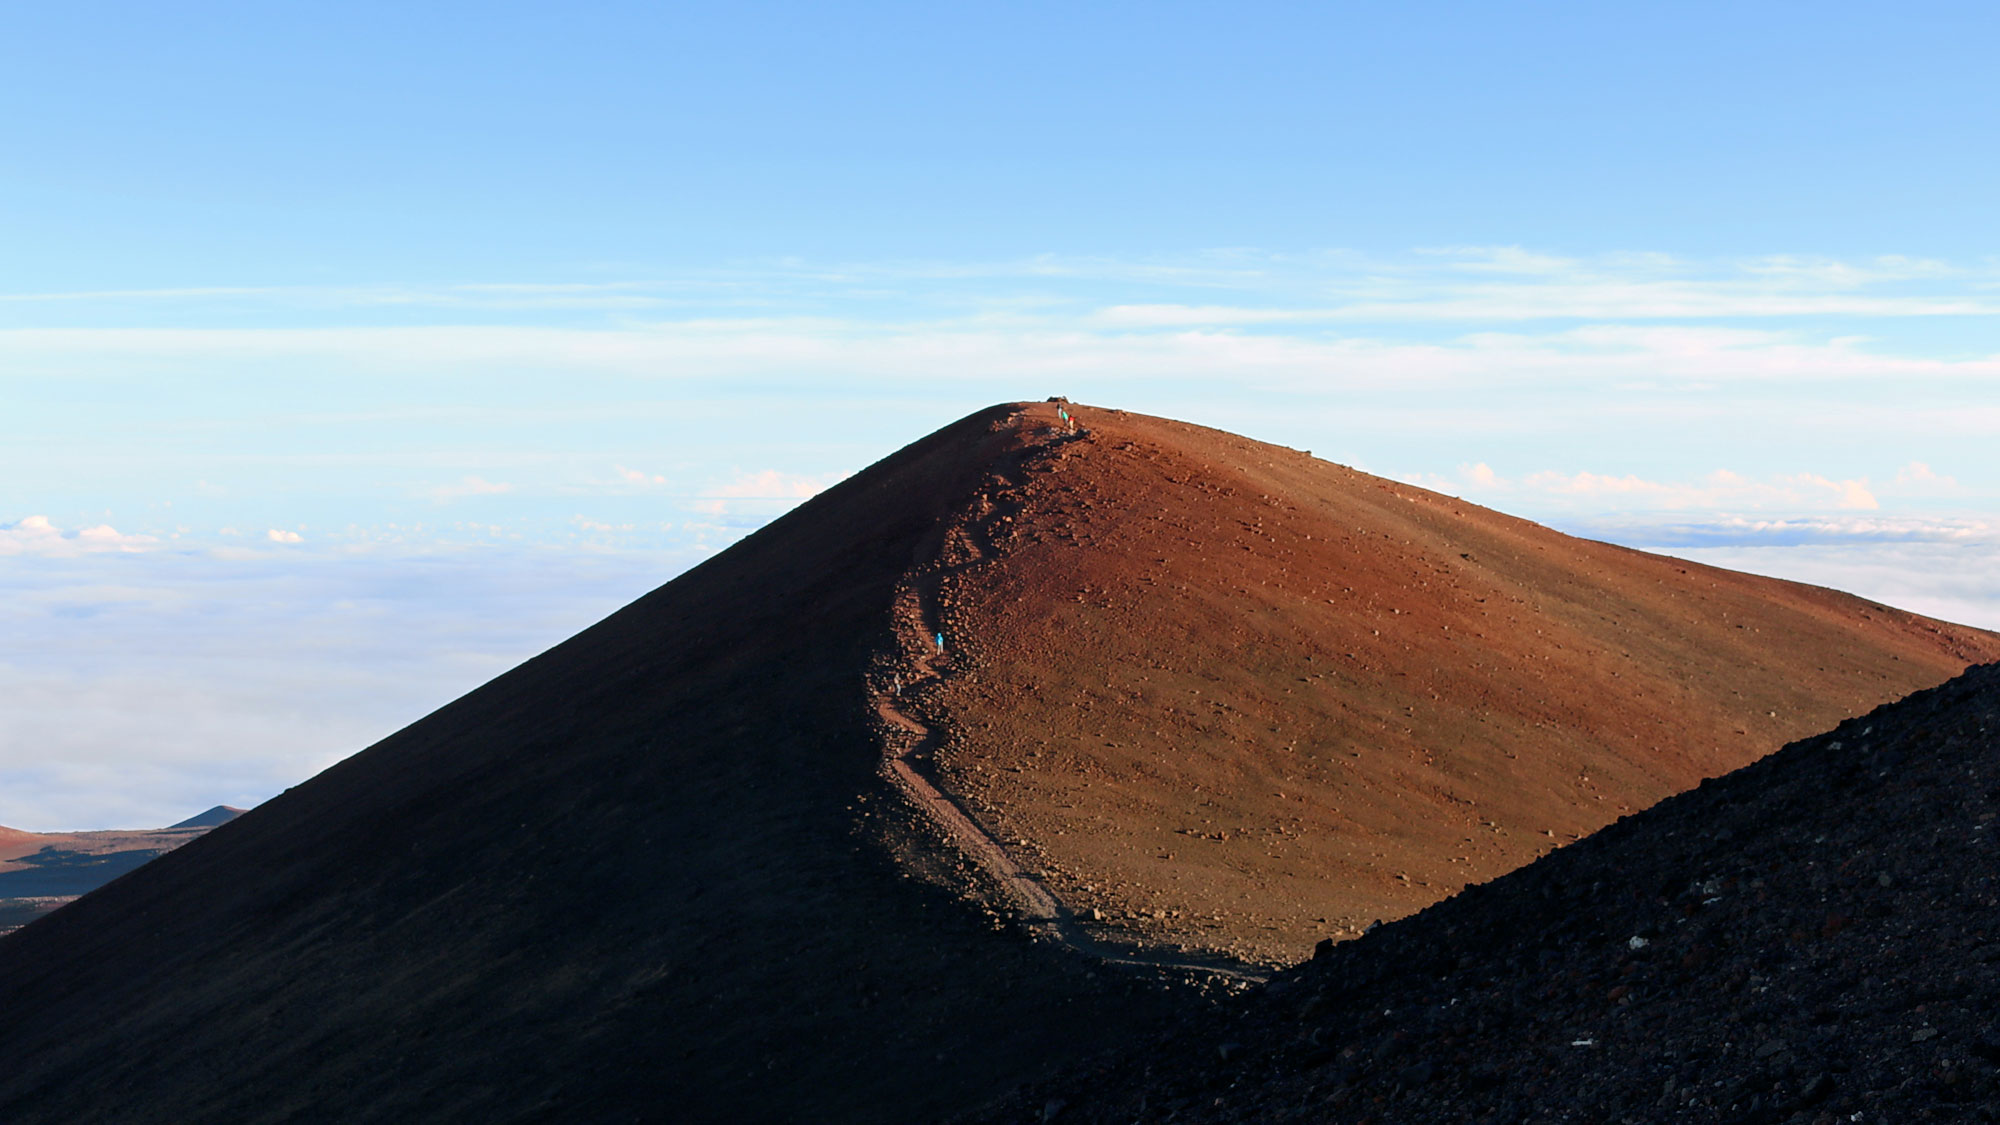 Photo of the summit trail on Mauna Kea. The photo shows a brown, barren, dry hill with a trail zigzagging up the nearest side.